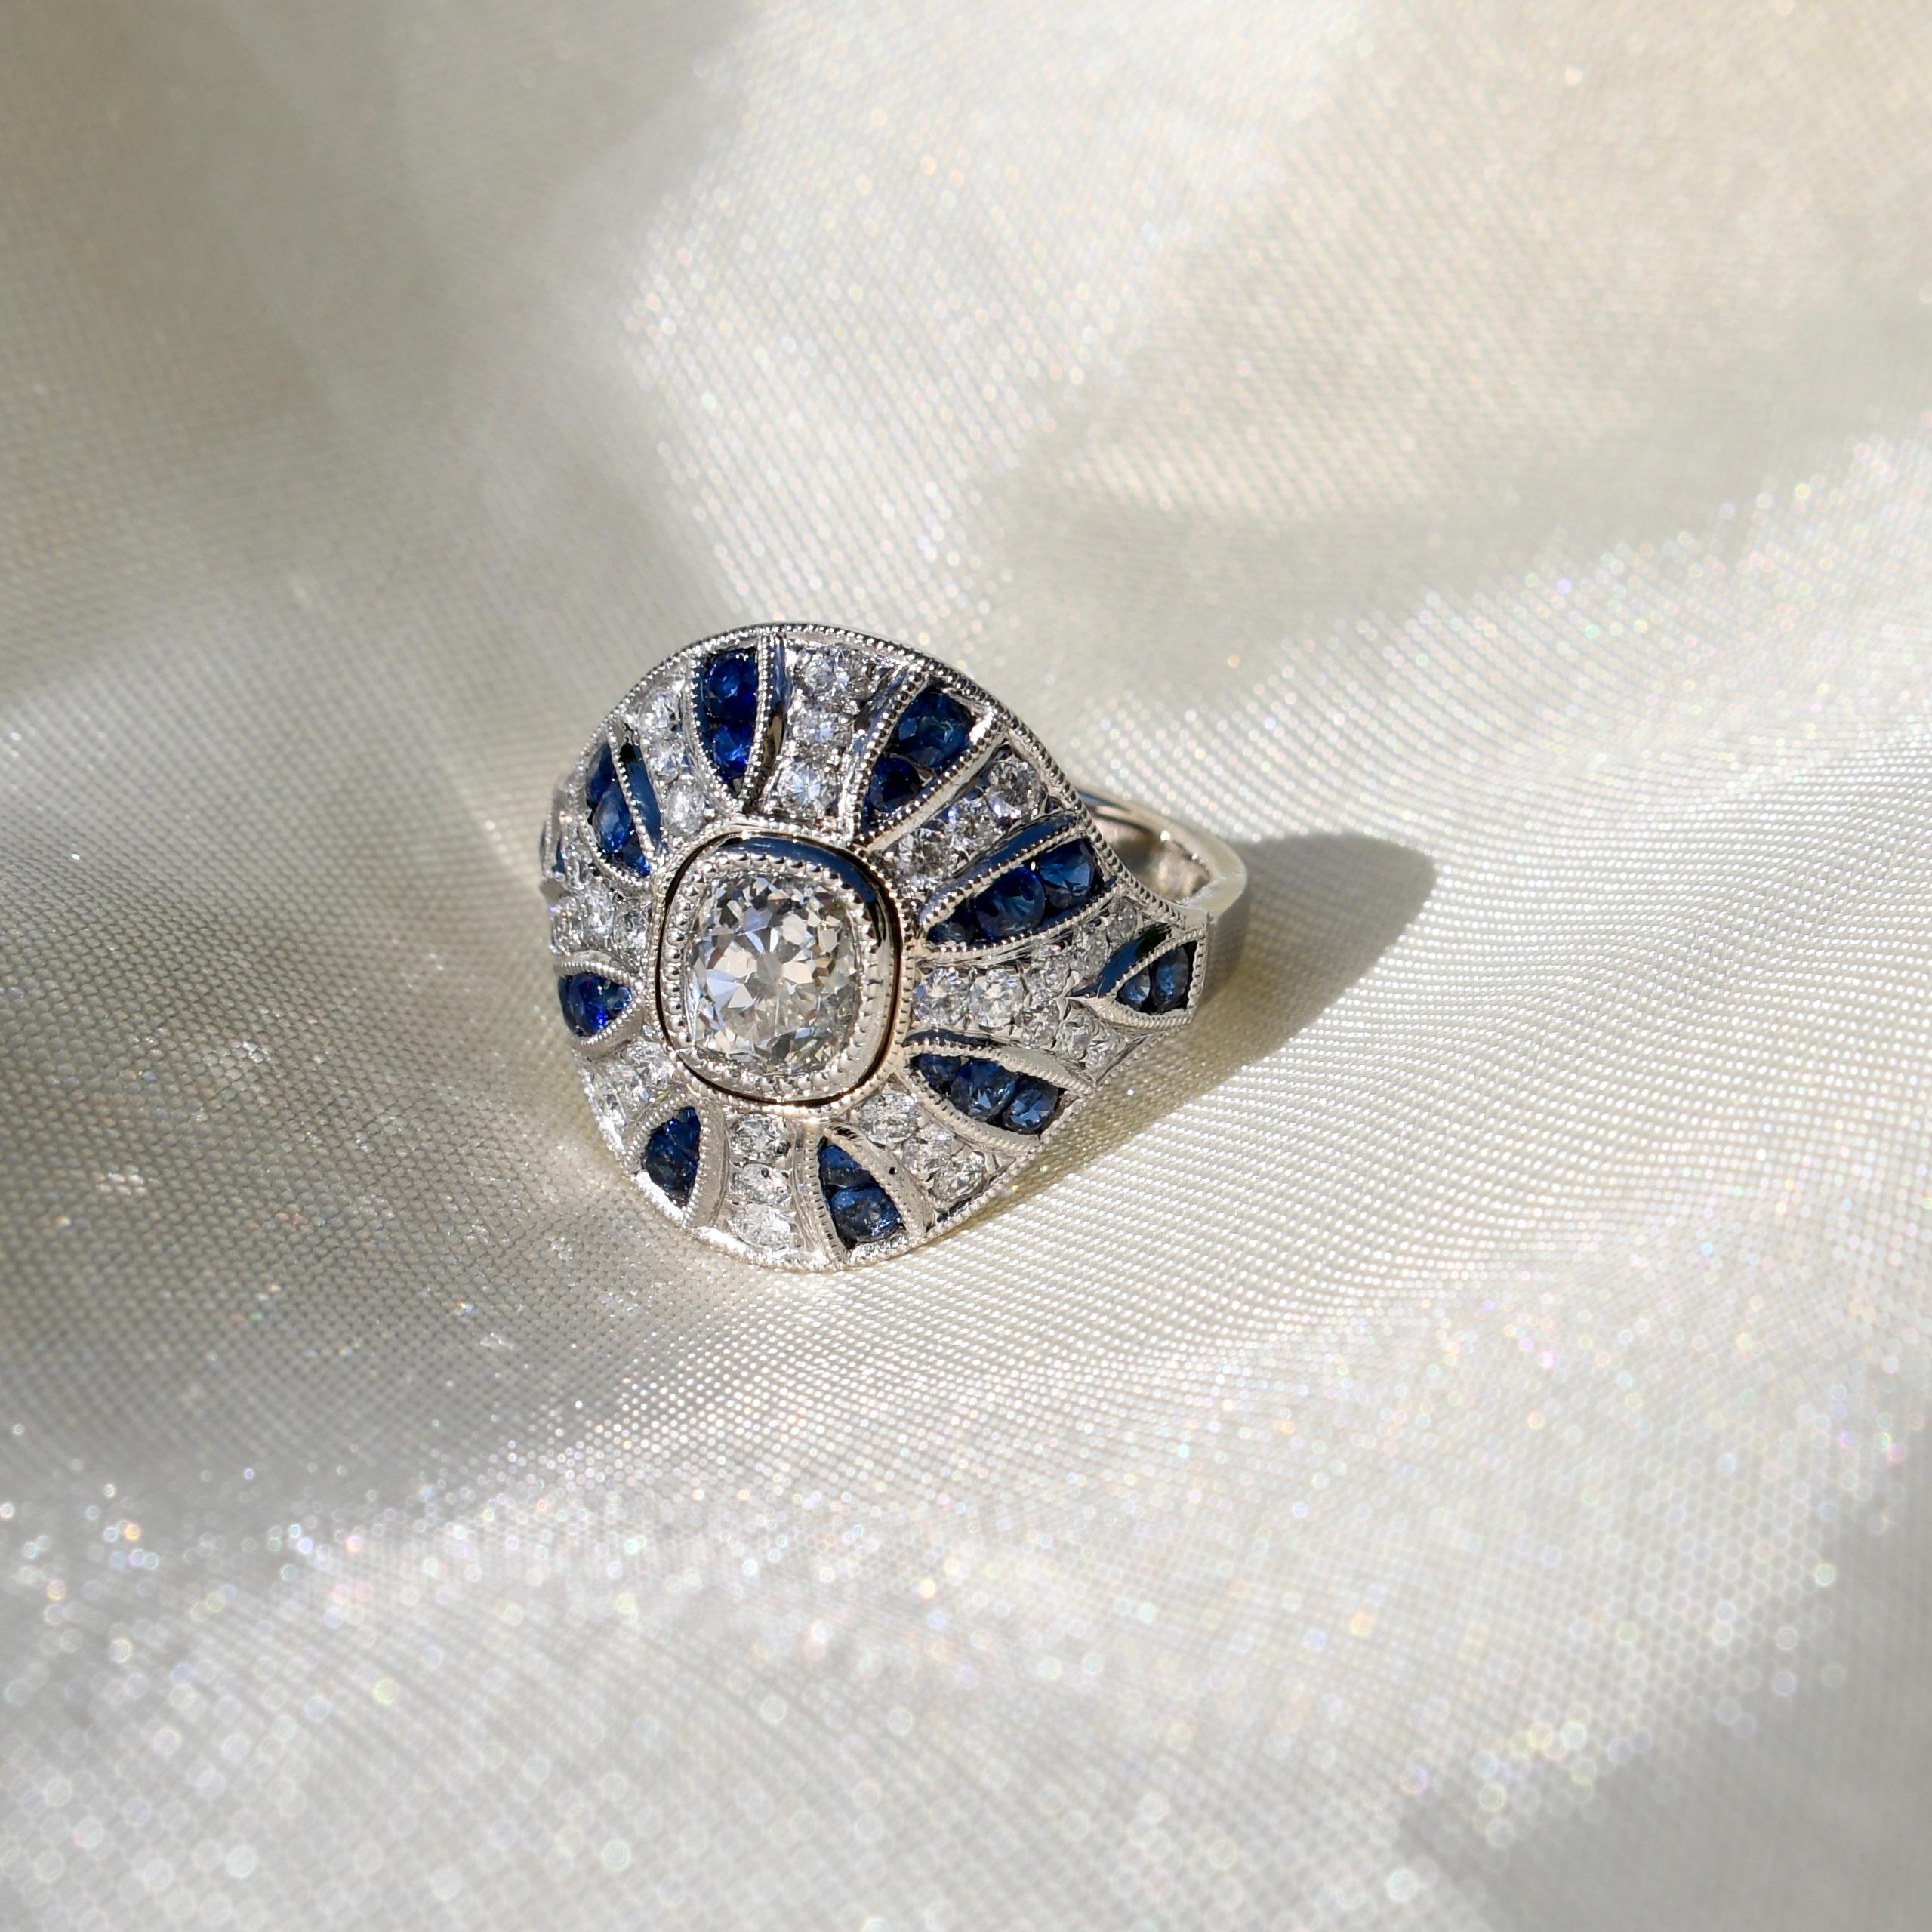 This ring was newly made and is in excellent condition. 

- One GIA certified old mine cut diamond, 1.10 ct (J/ SI1) 
- Thirty four brilliant cut diamonds, 0.56 ct total 
- Twenty eight sapphires, 0.99 ct total 
- Total diamond weight: 1.66 ct
-